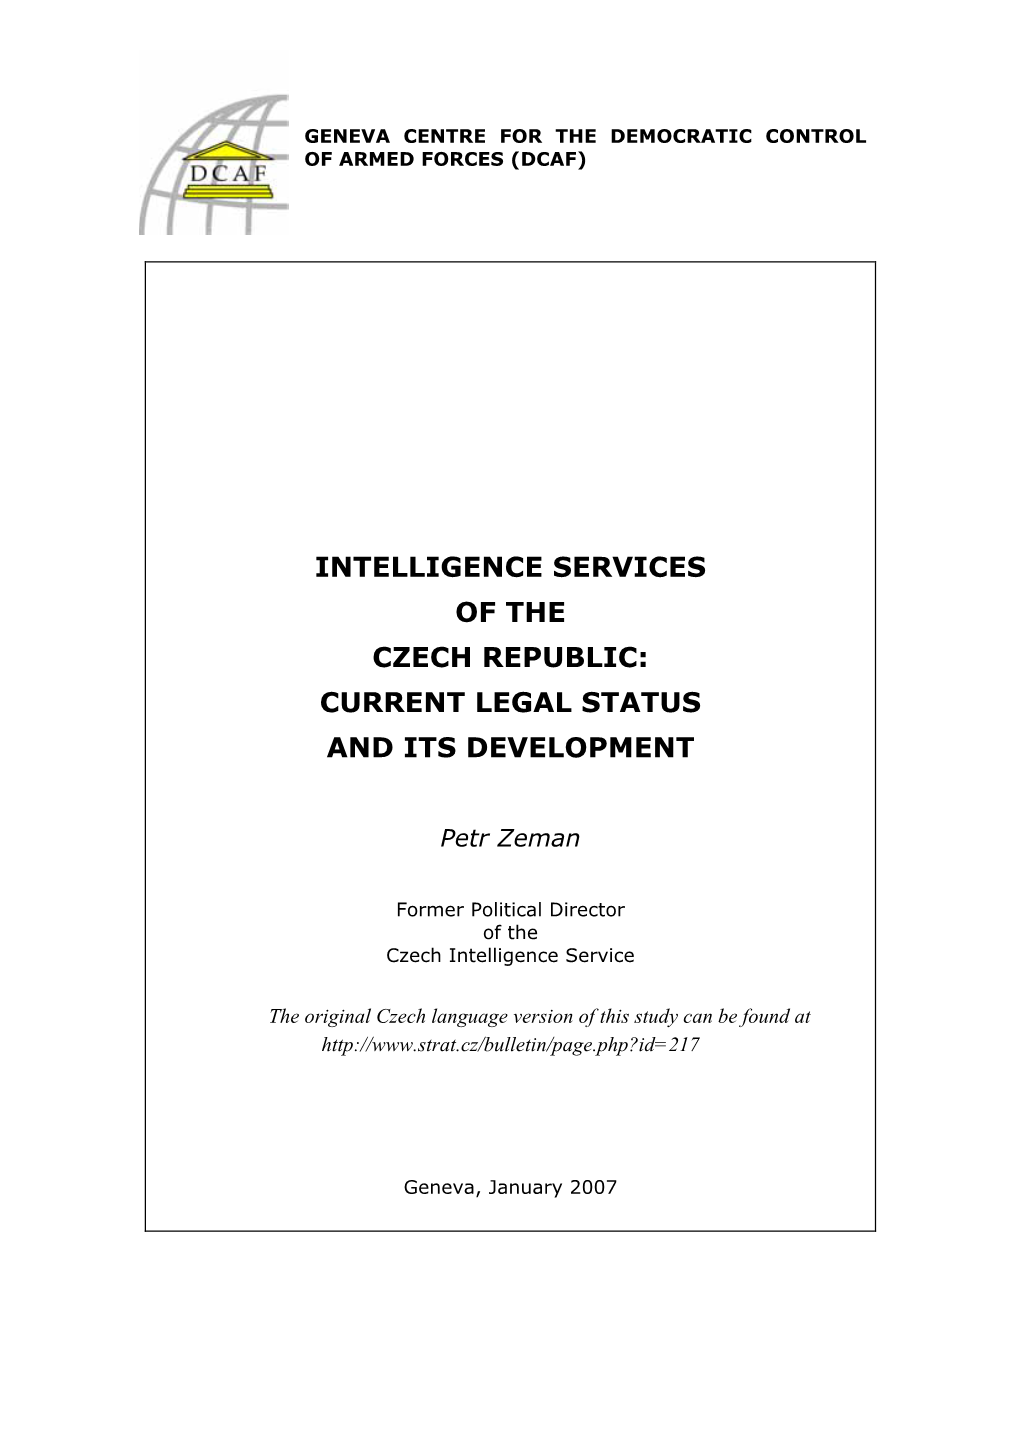 Intelligence Services of the Czech Republic: Current Legal Status and Its Development